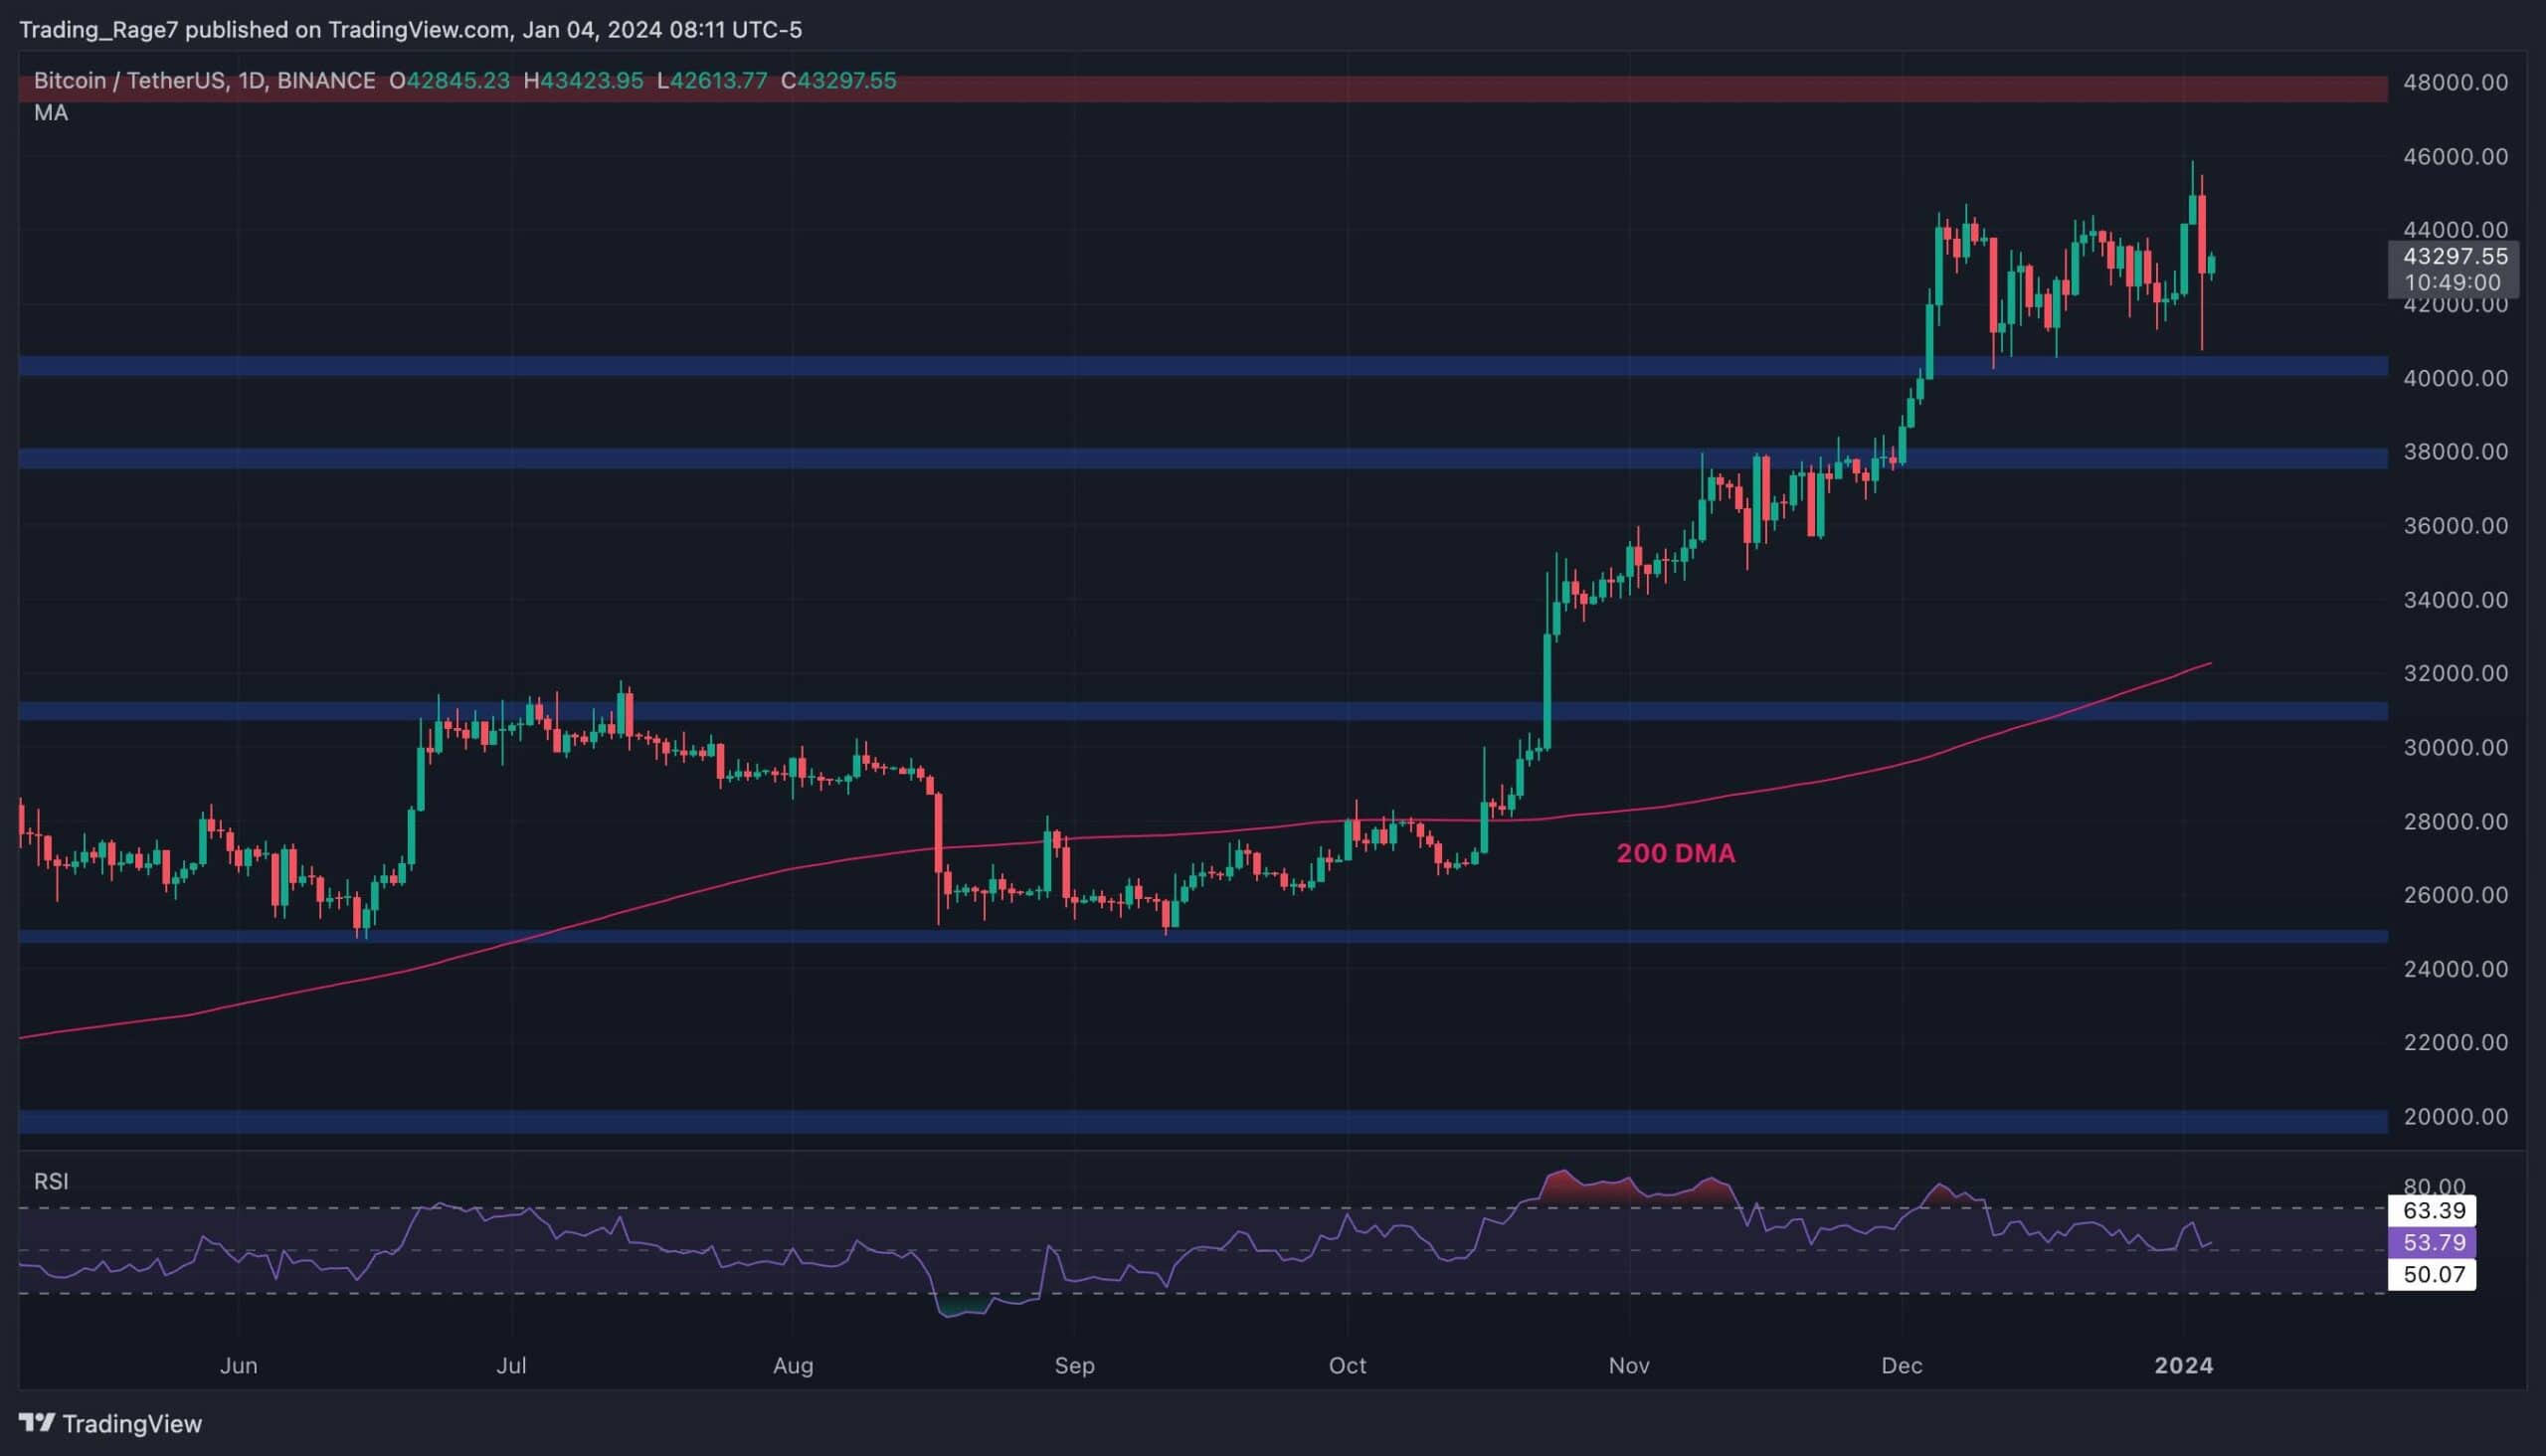 Quick-flush-or-a-sign-of-deeper-correction-for-btc:-yesterday’s-crash-in-depth-(bitcoin-price-analysis)